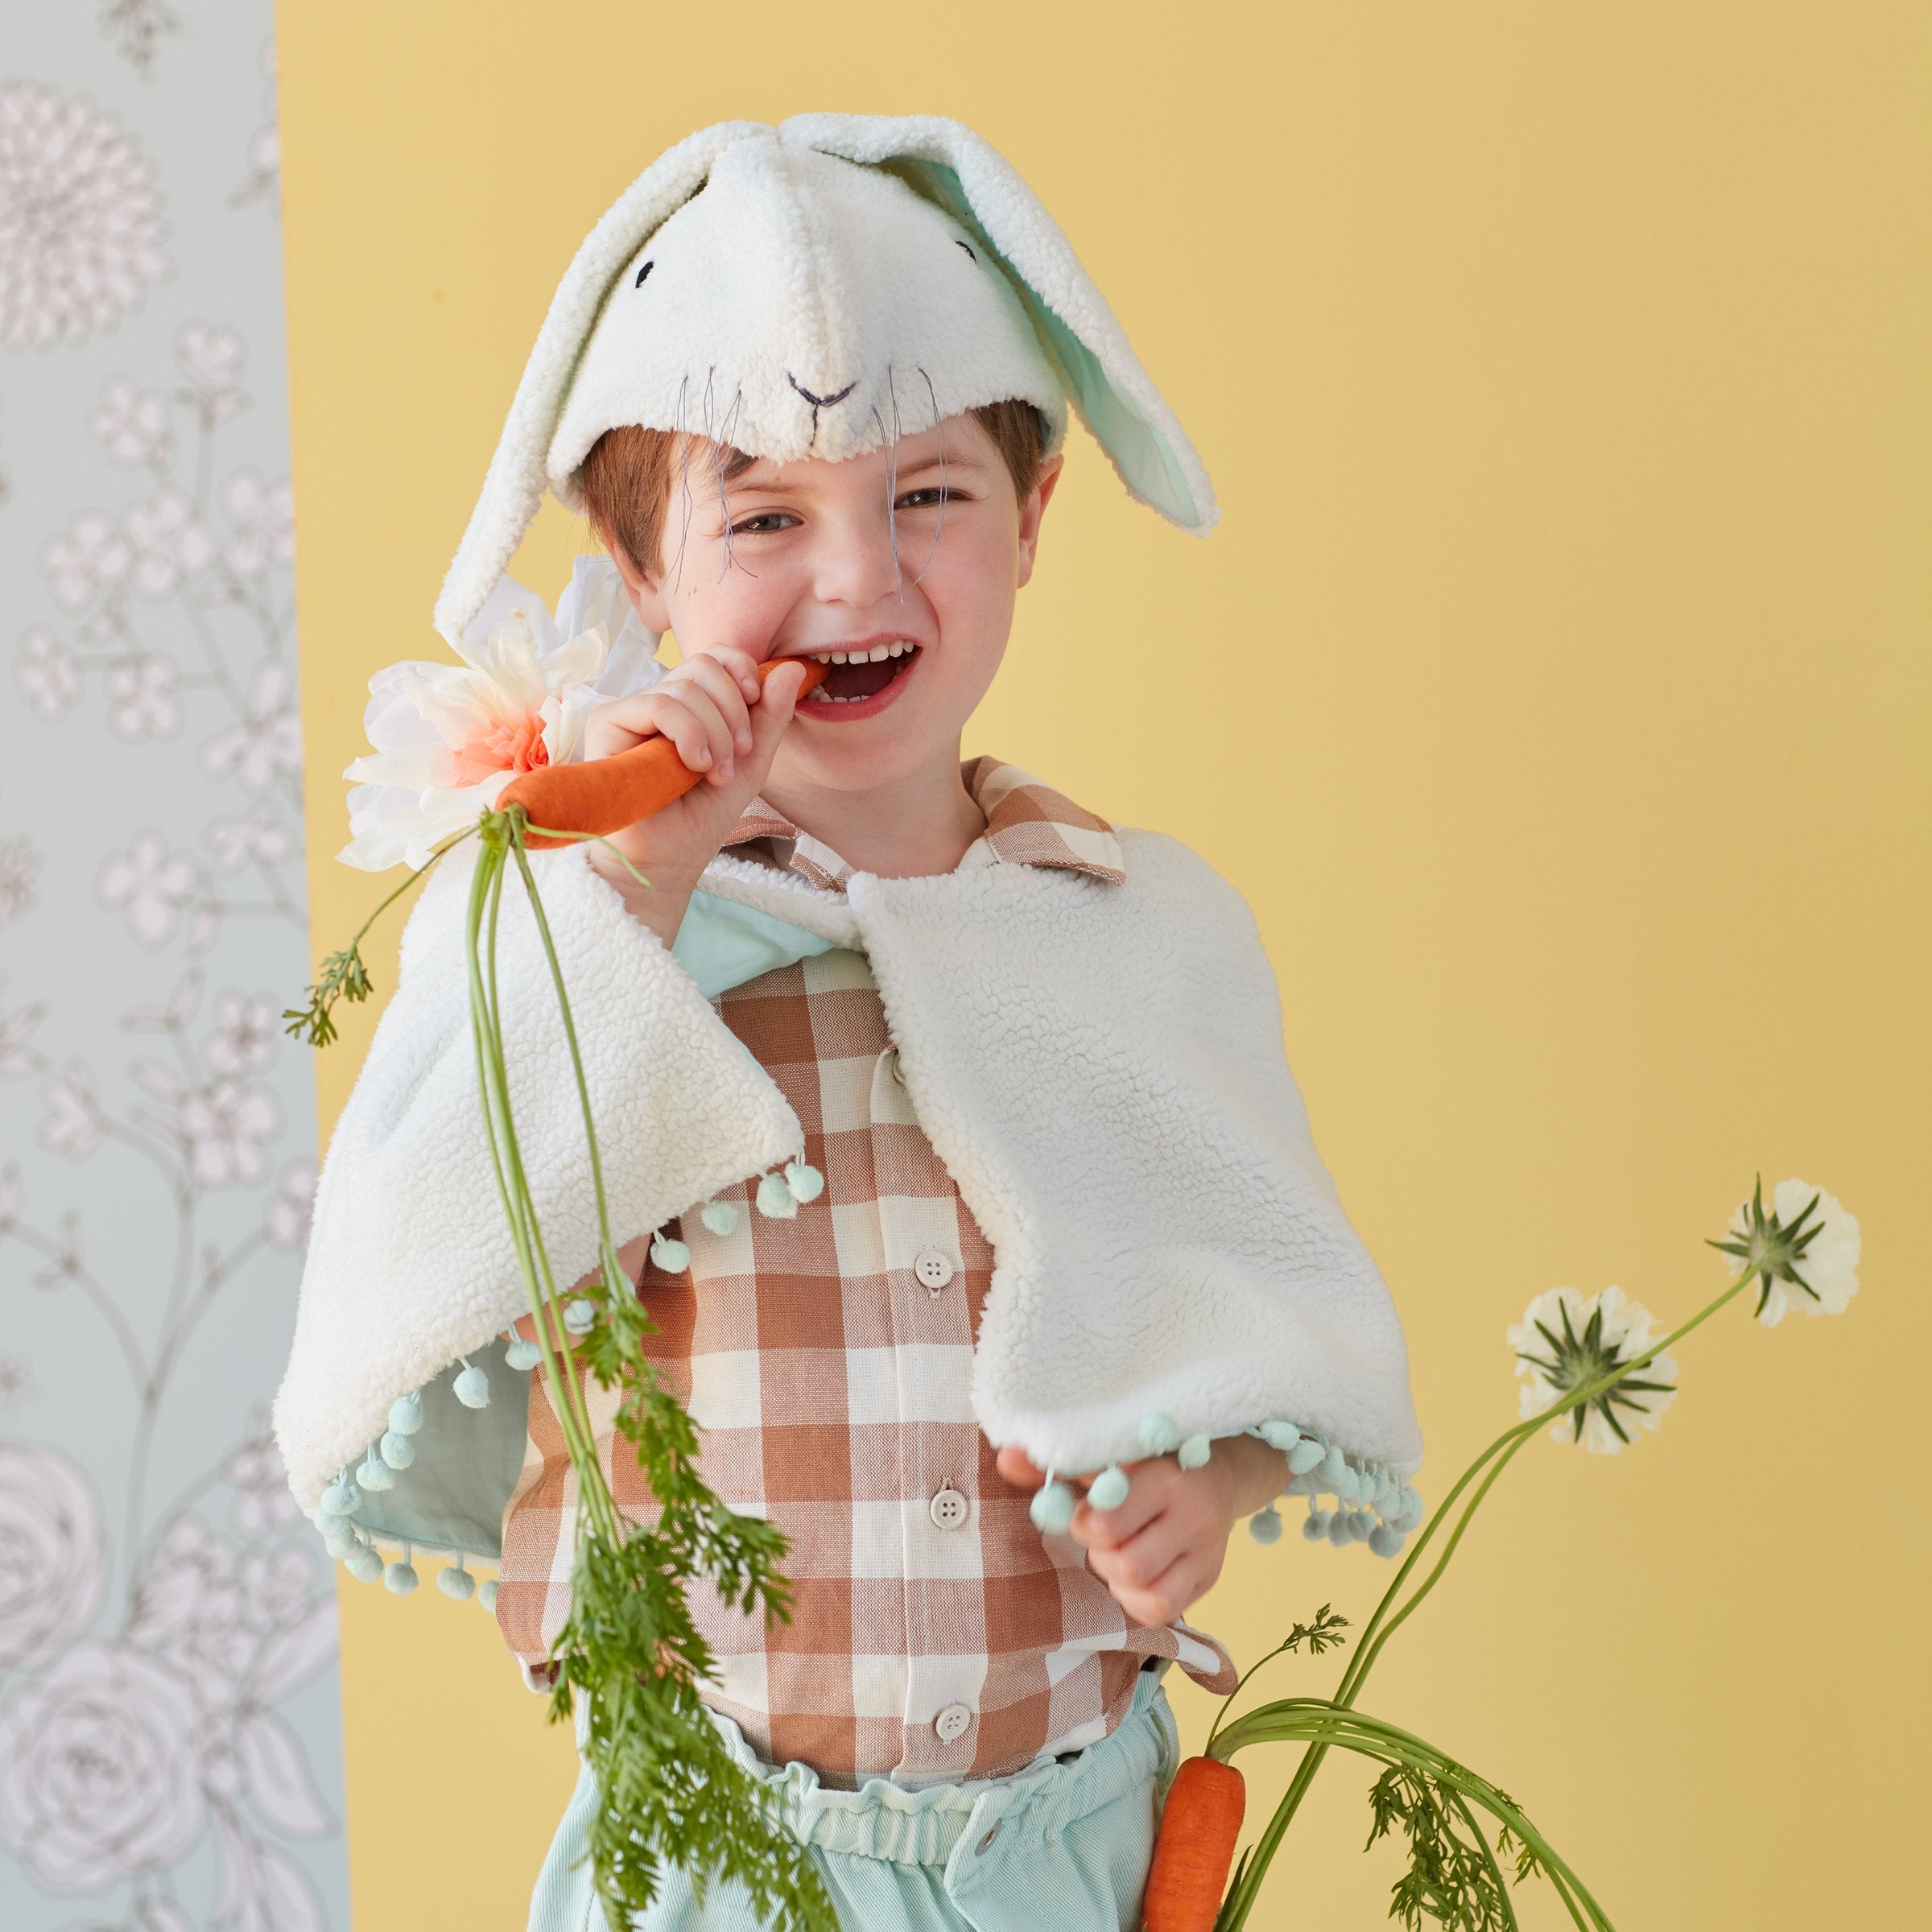 This bunny costumes features a cape and head dress crafted from soft fleece, with embroidered details and a mint lining.